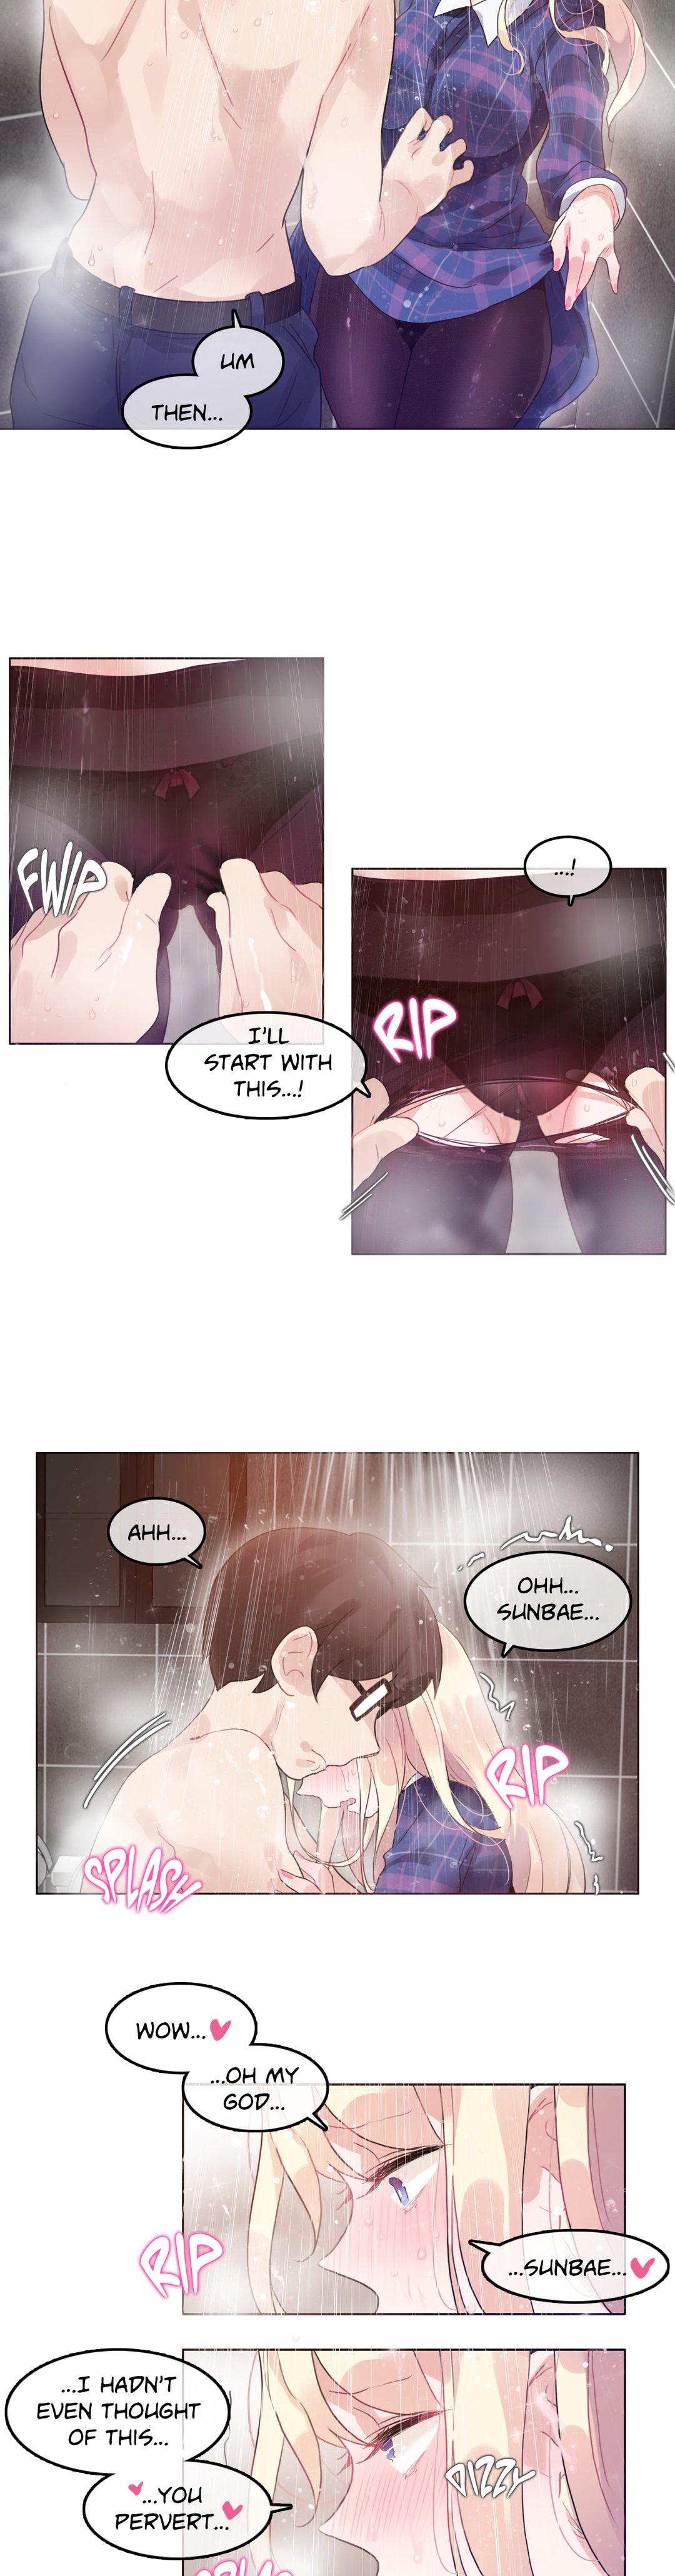 A Pervert's Daily Life • Chapter 41-45 59